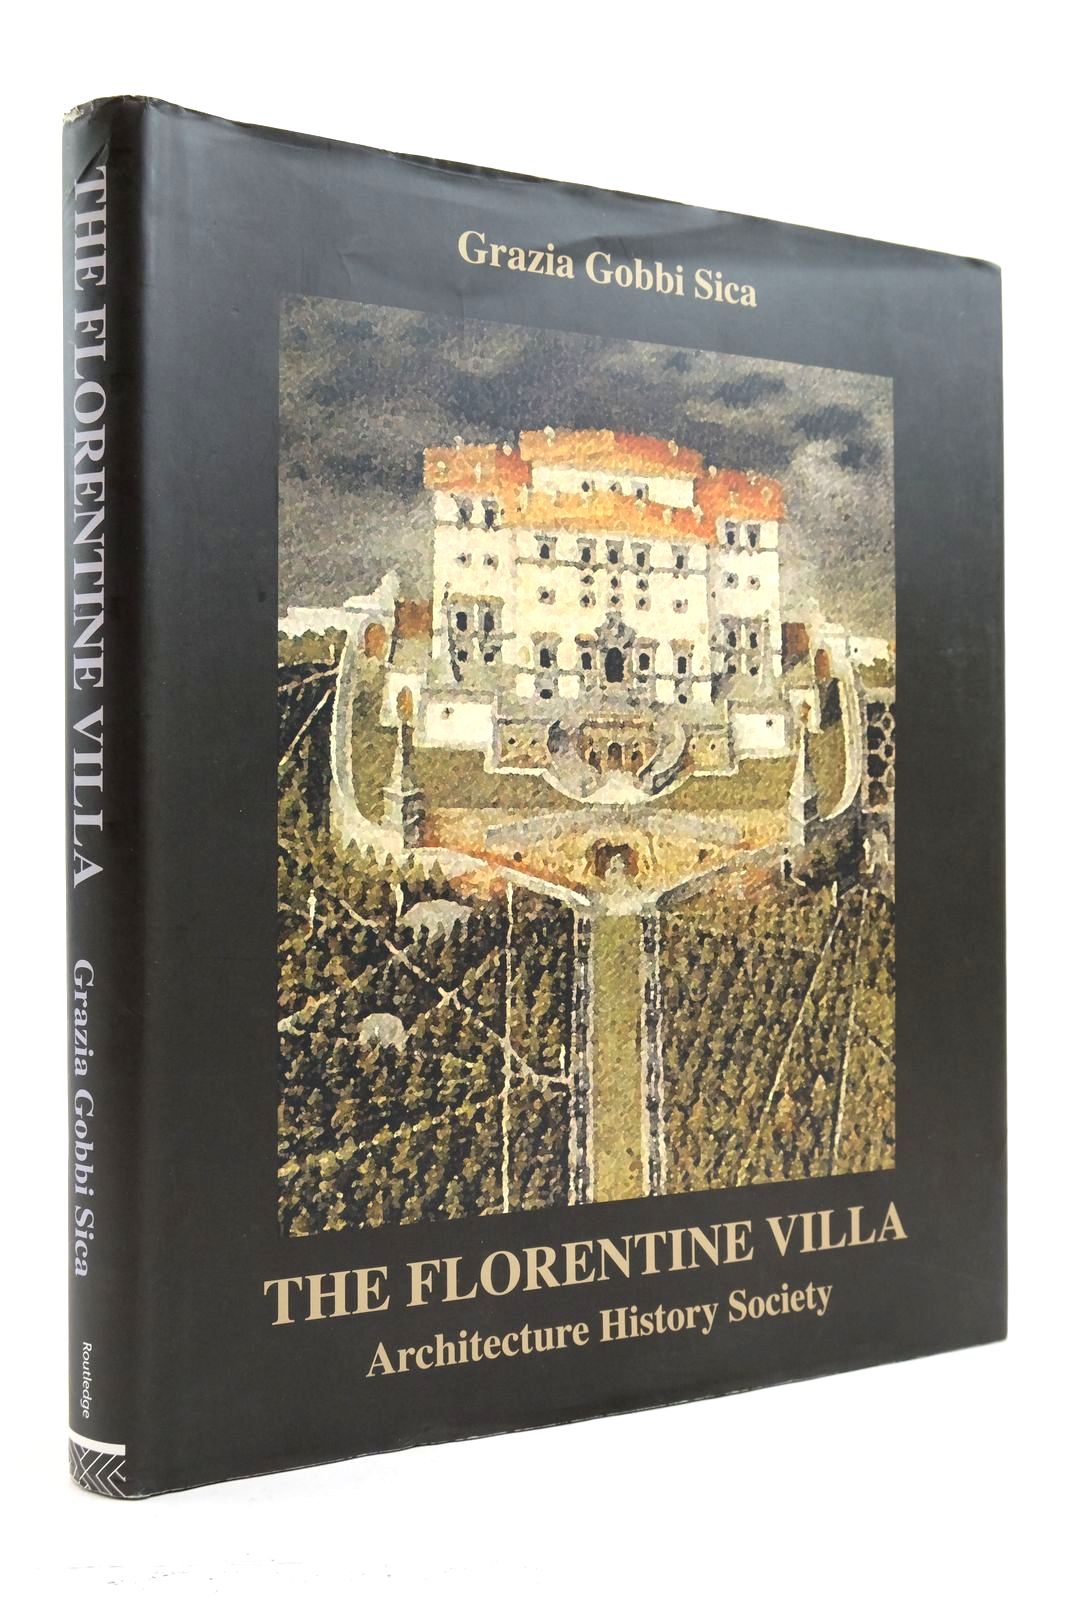 Photo of THE FLORENTINE VILLA ARCHITECTURE HISTORY SOCIETY written by Sica, Grazia Gobbi published by Routledge (STOCK CODE: 2139045)  for sale by Stella & Rose's Books